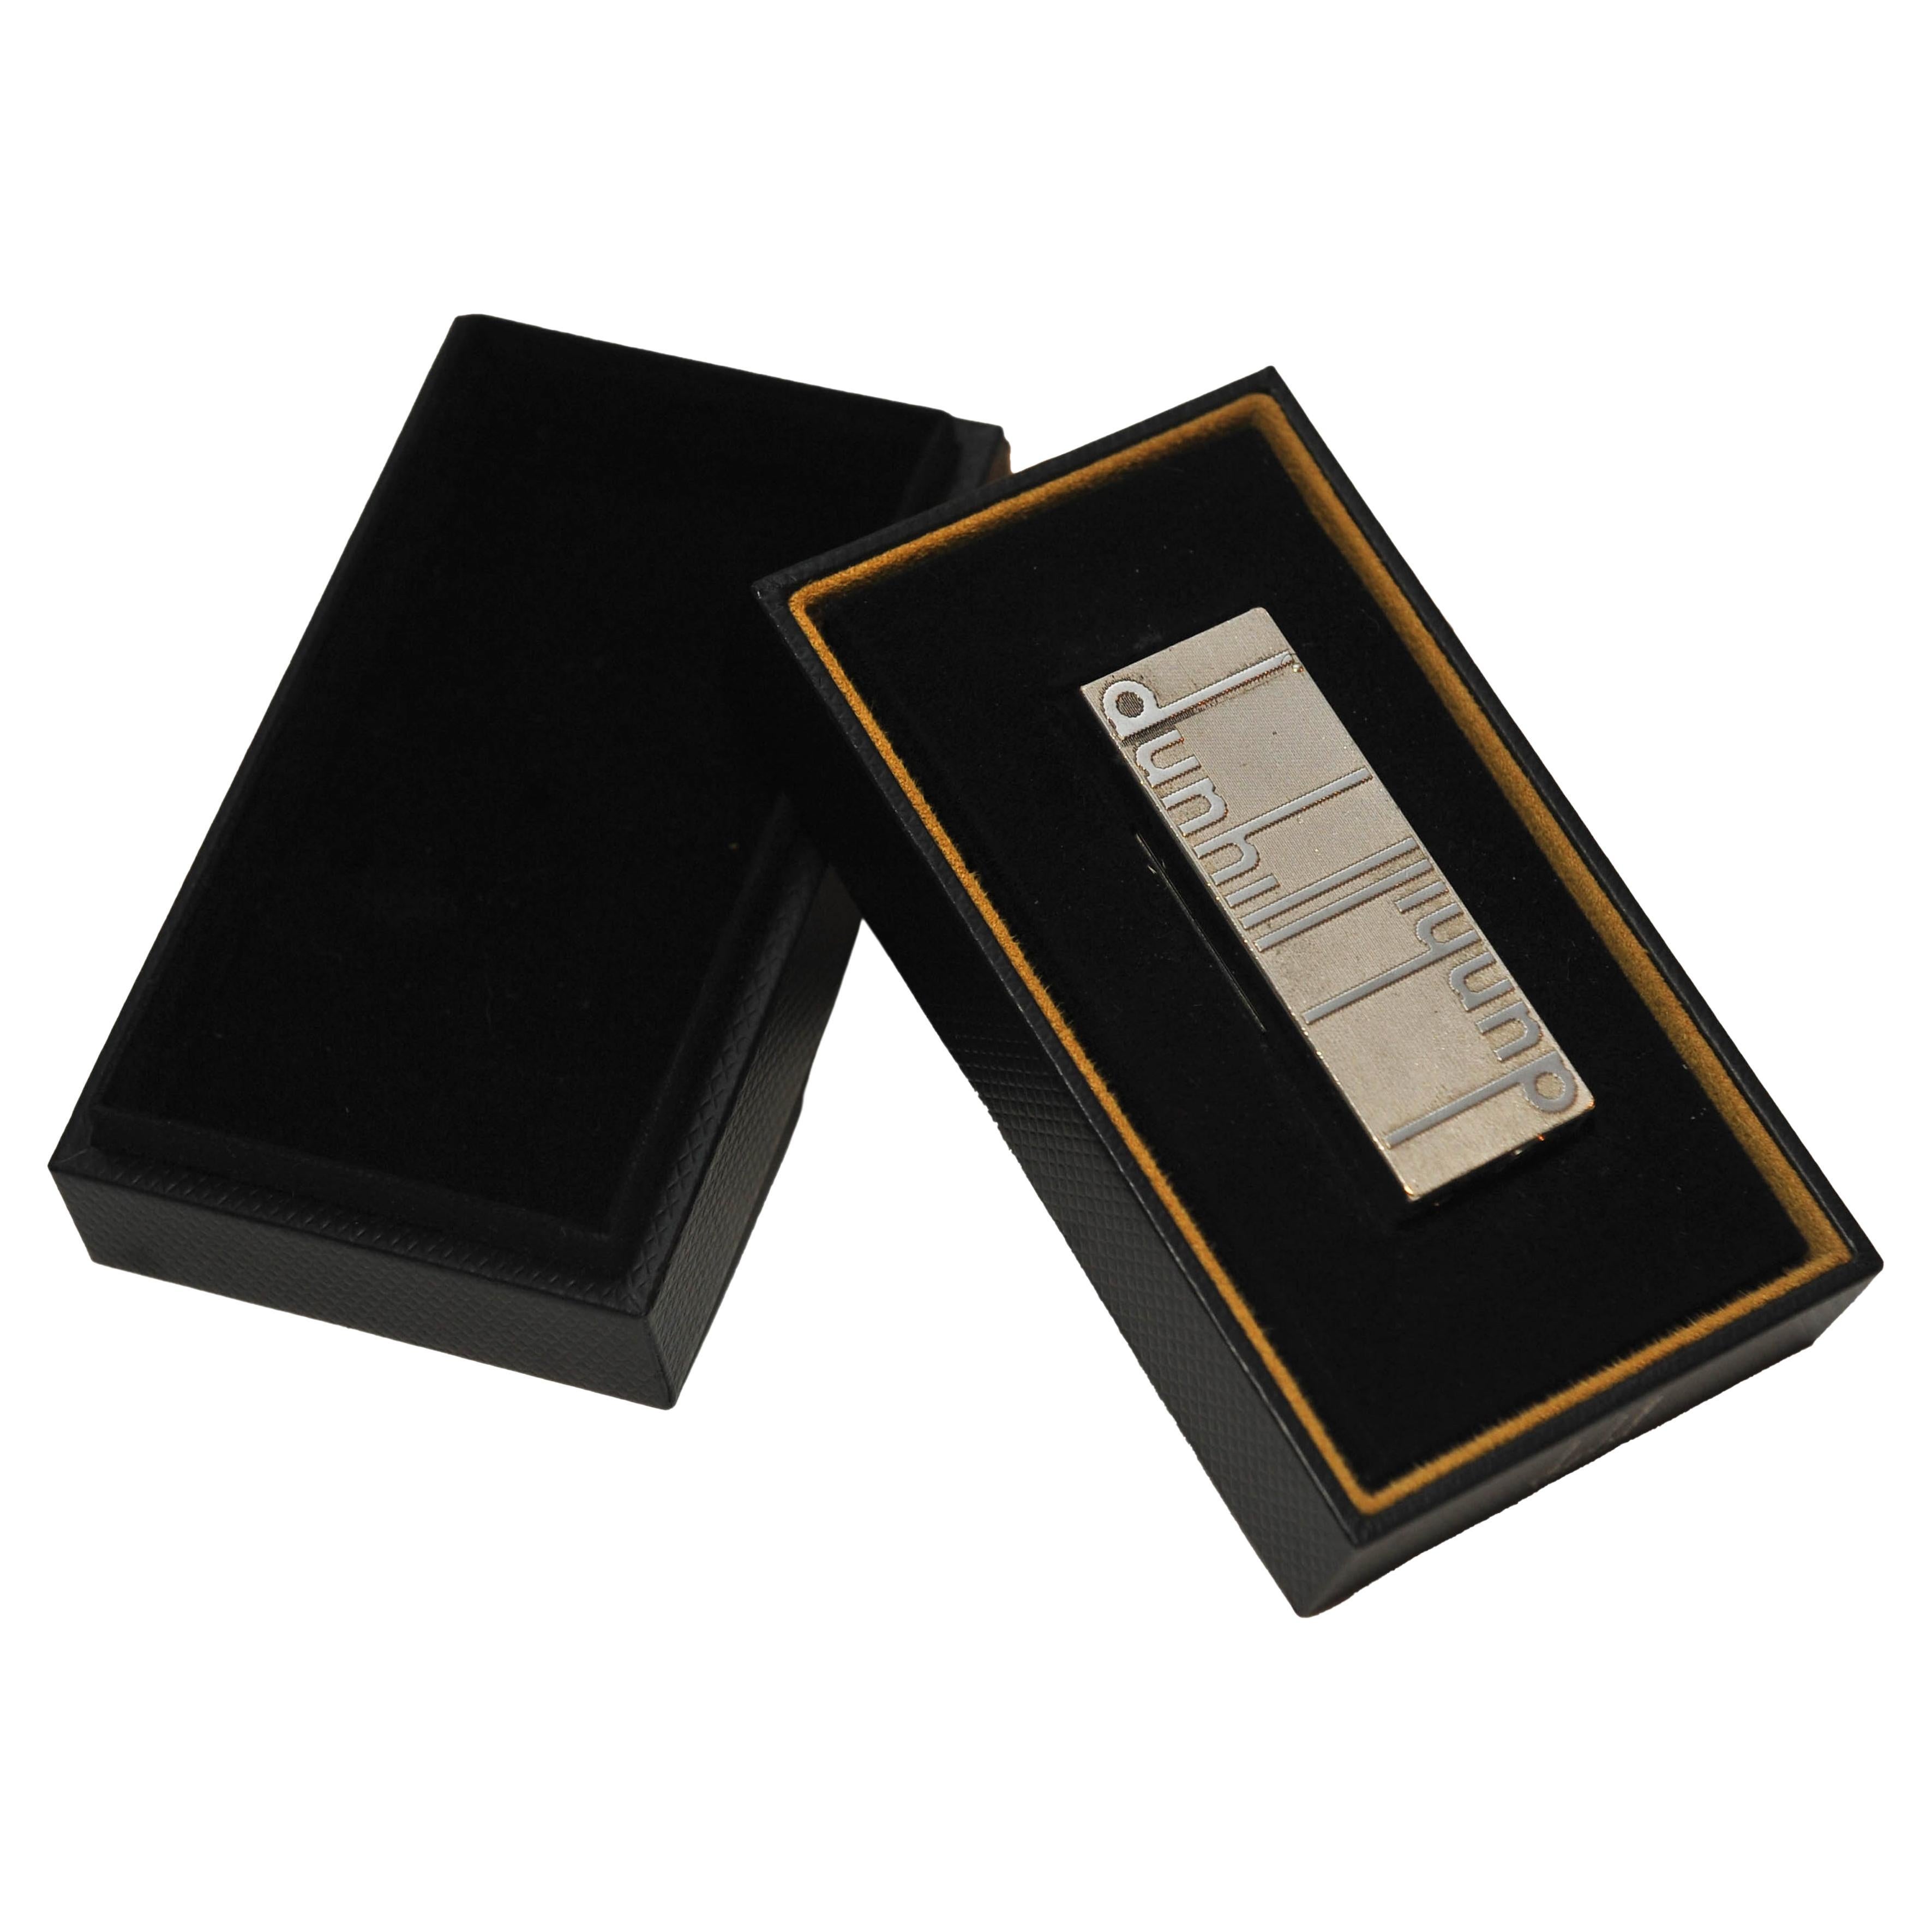 Dunhill of London Longtail Logo Rollgas Cigarette Lighter With Guarantee Card and Original Dunhill Presentation Box Box 

Inspired by the dunhill archive, a palladium-plated brass lighter featuring the iconic longtail logo.

Made in Switzerland